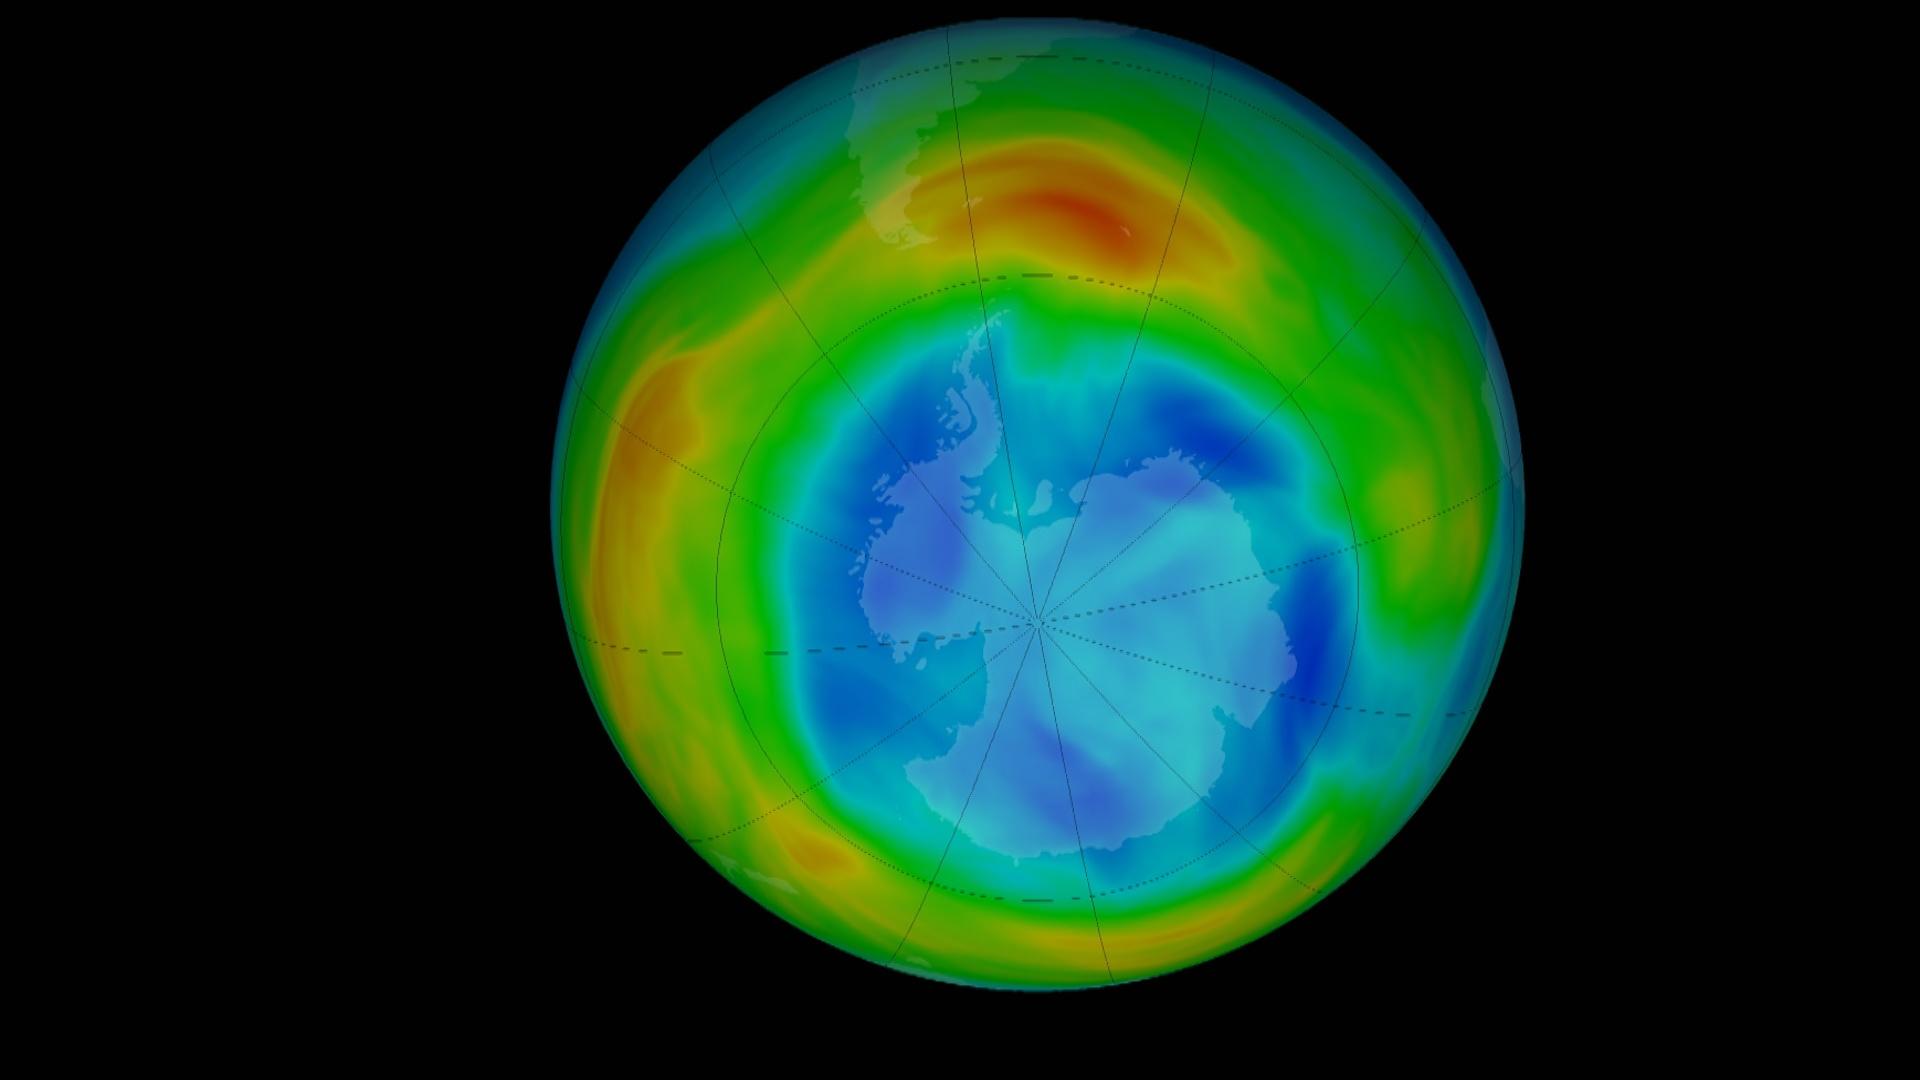 An image from the NASA Archive showing the ozone layer.